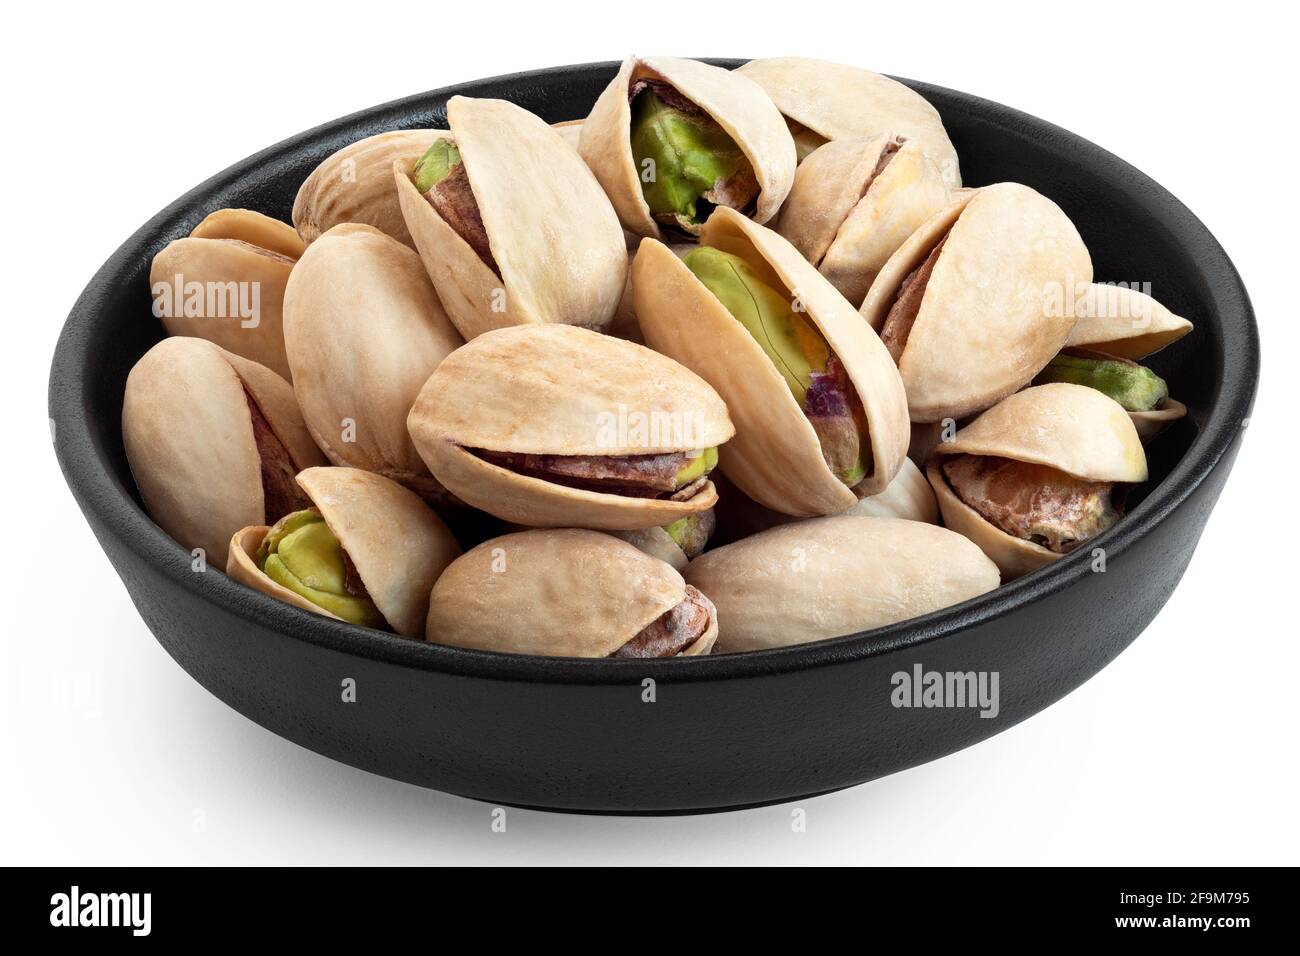 Salted pistachios in shell in a black ceramic bowl isolated on white. Stock Photo